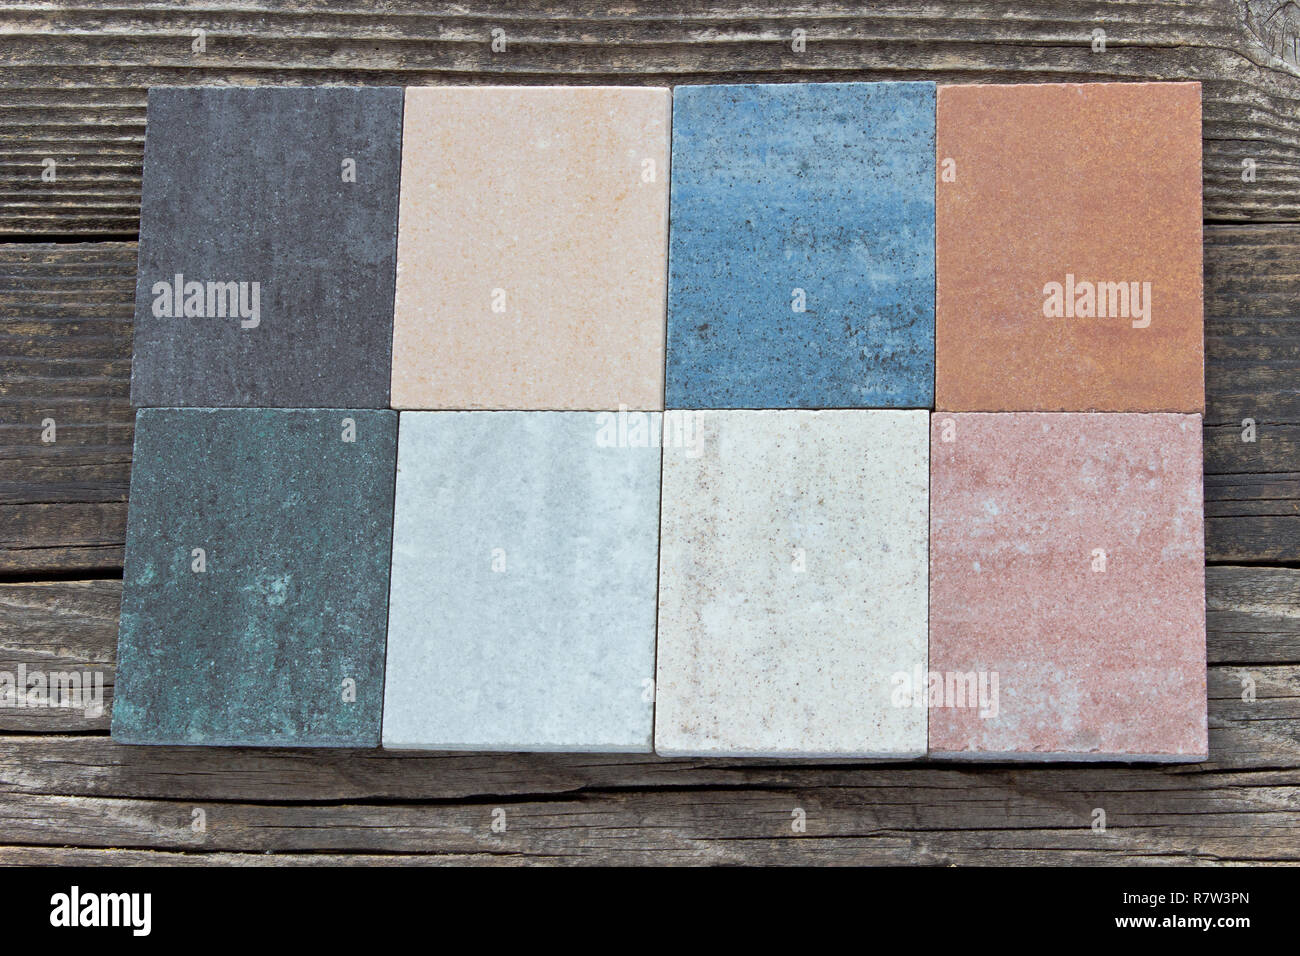 Tile samples on wooden background Stock Photo